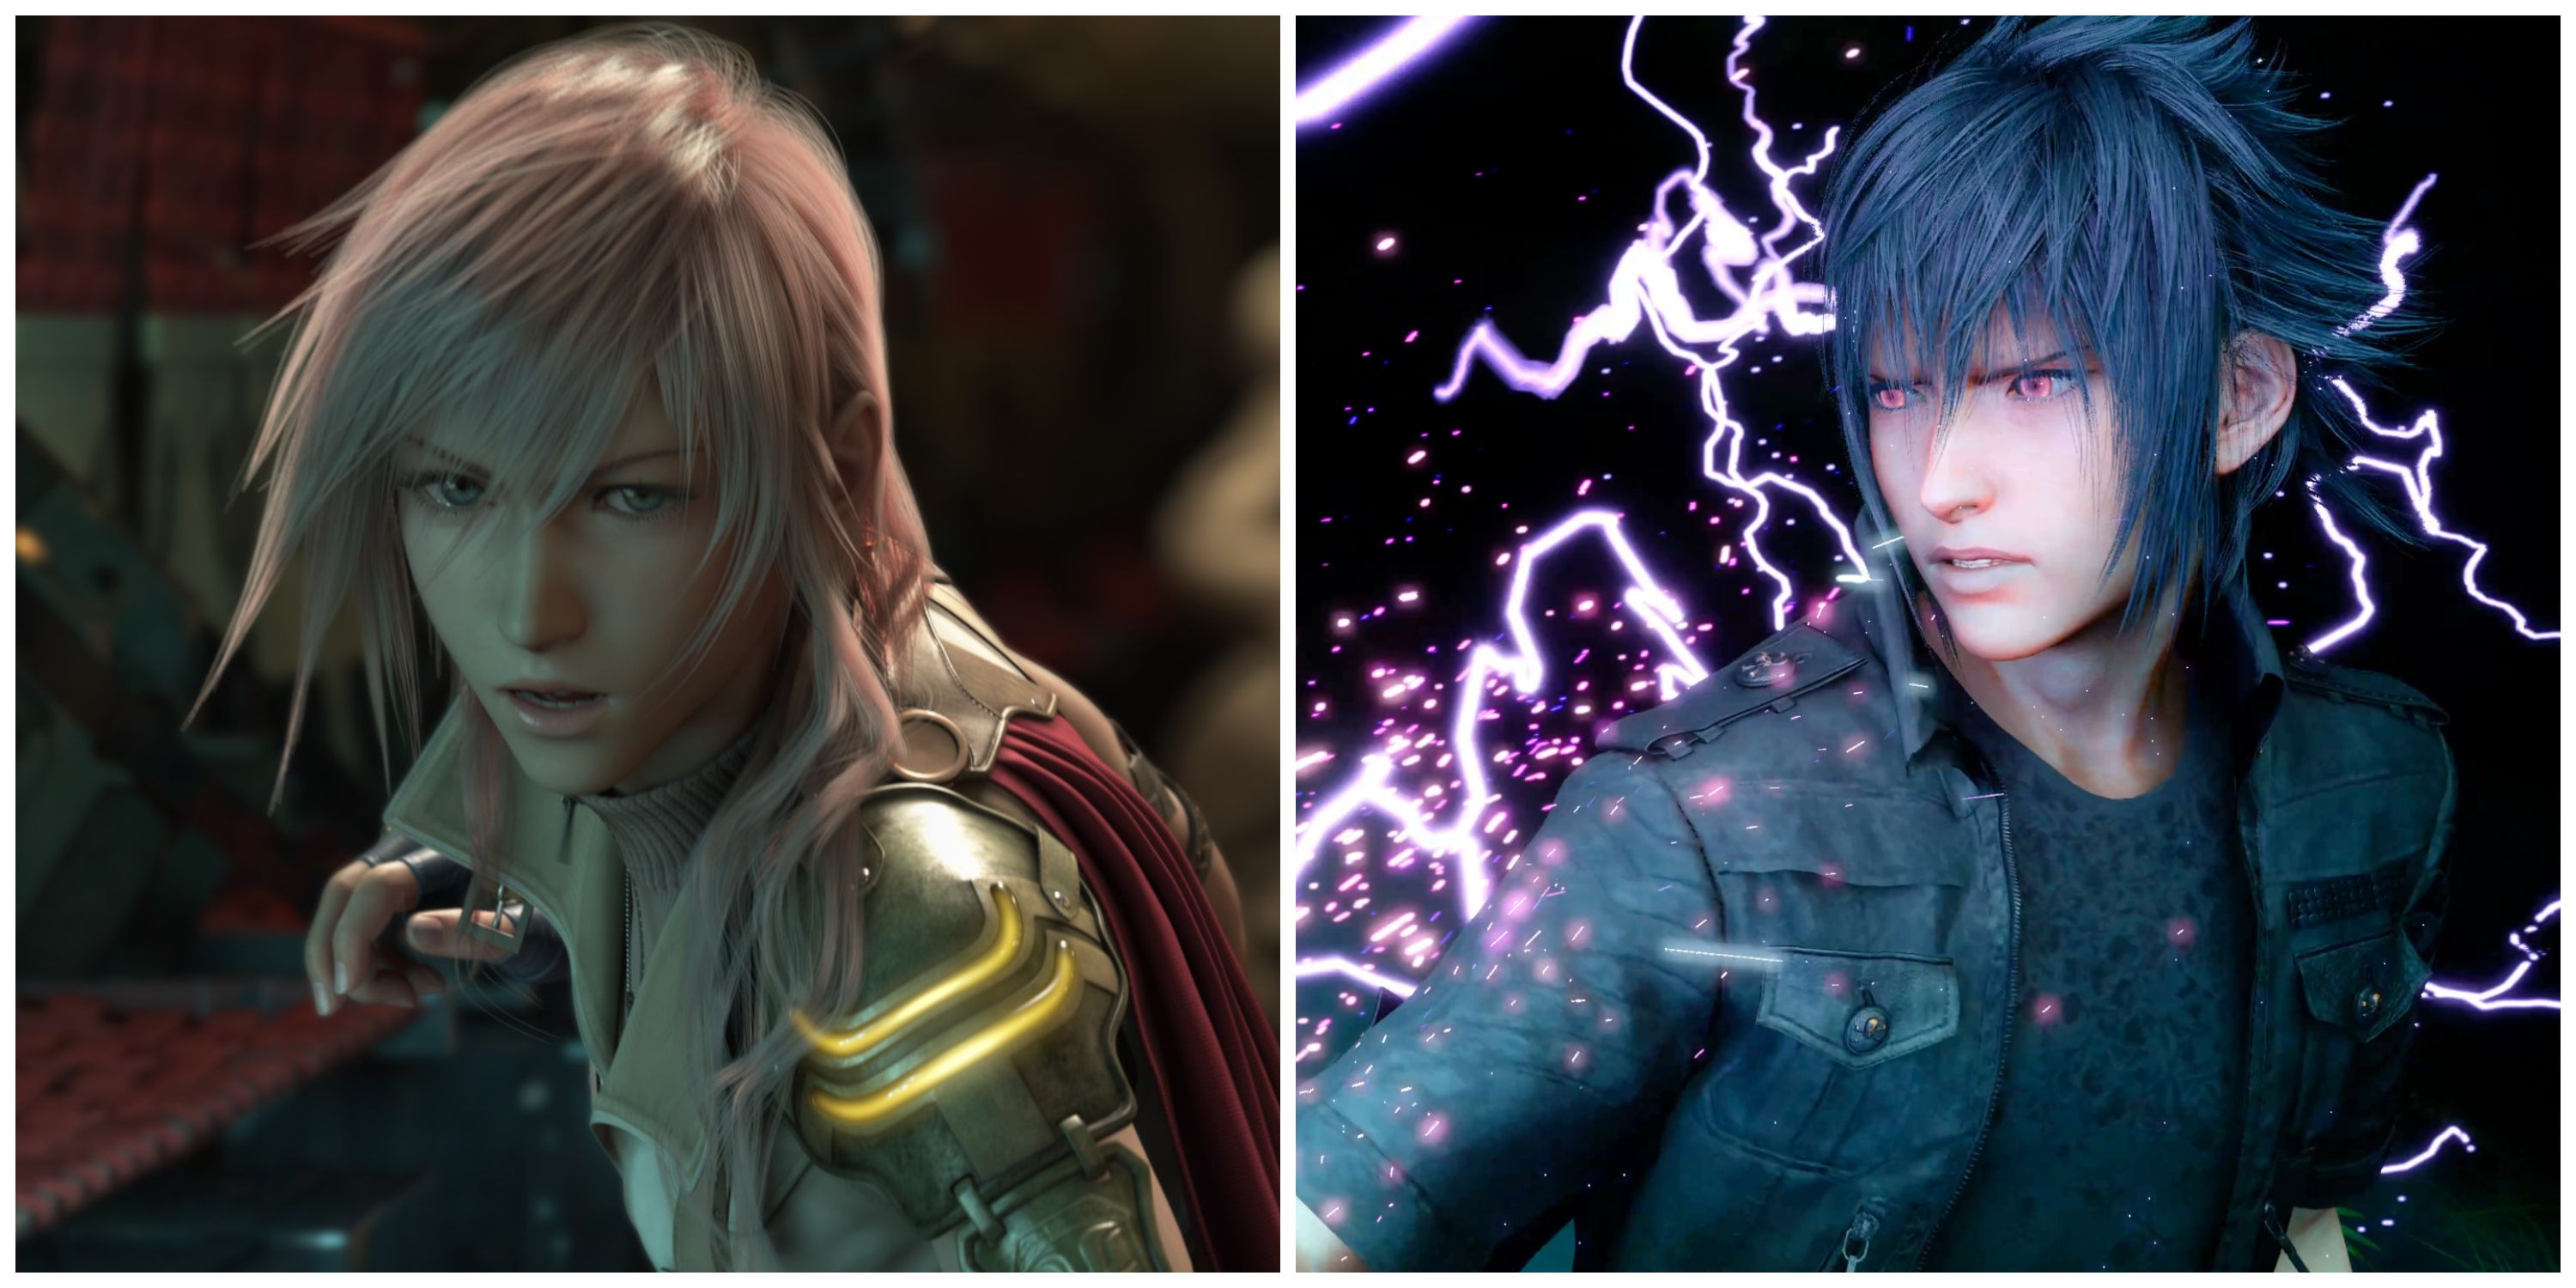 Protagonists of Final Fantasy XIII and Final Fantasy XV